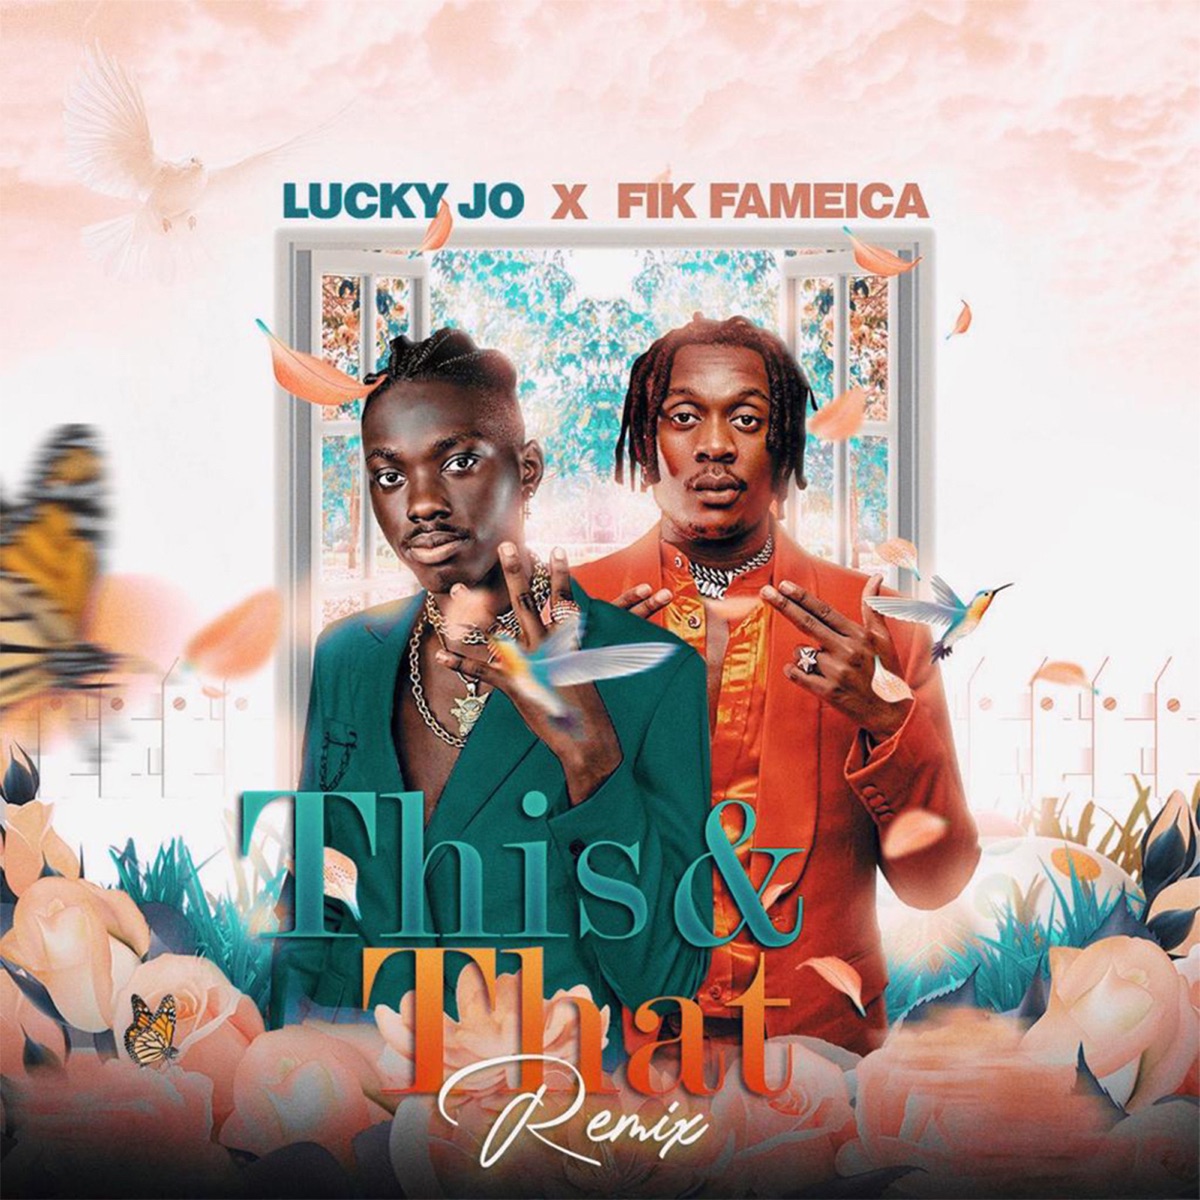 fik-fameica-this-and-that-remix-album-cover